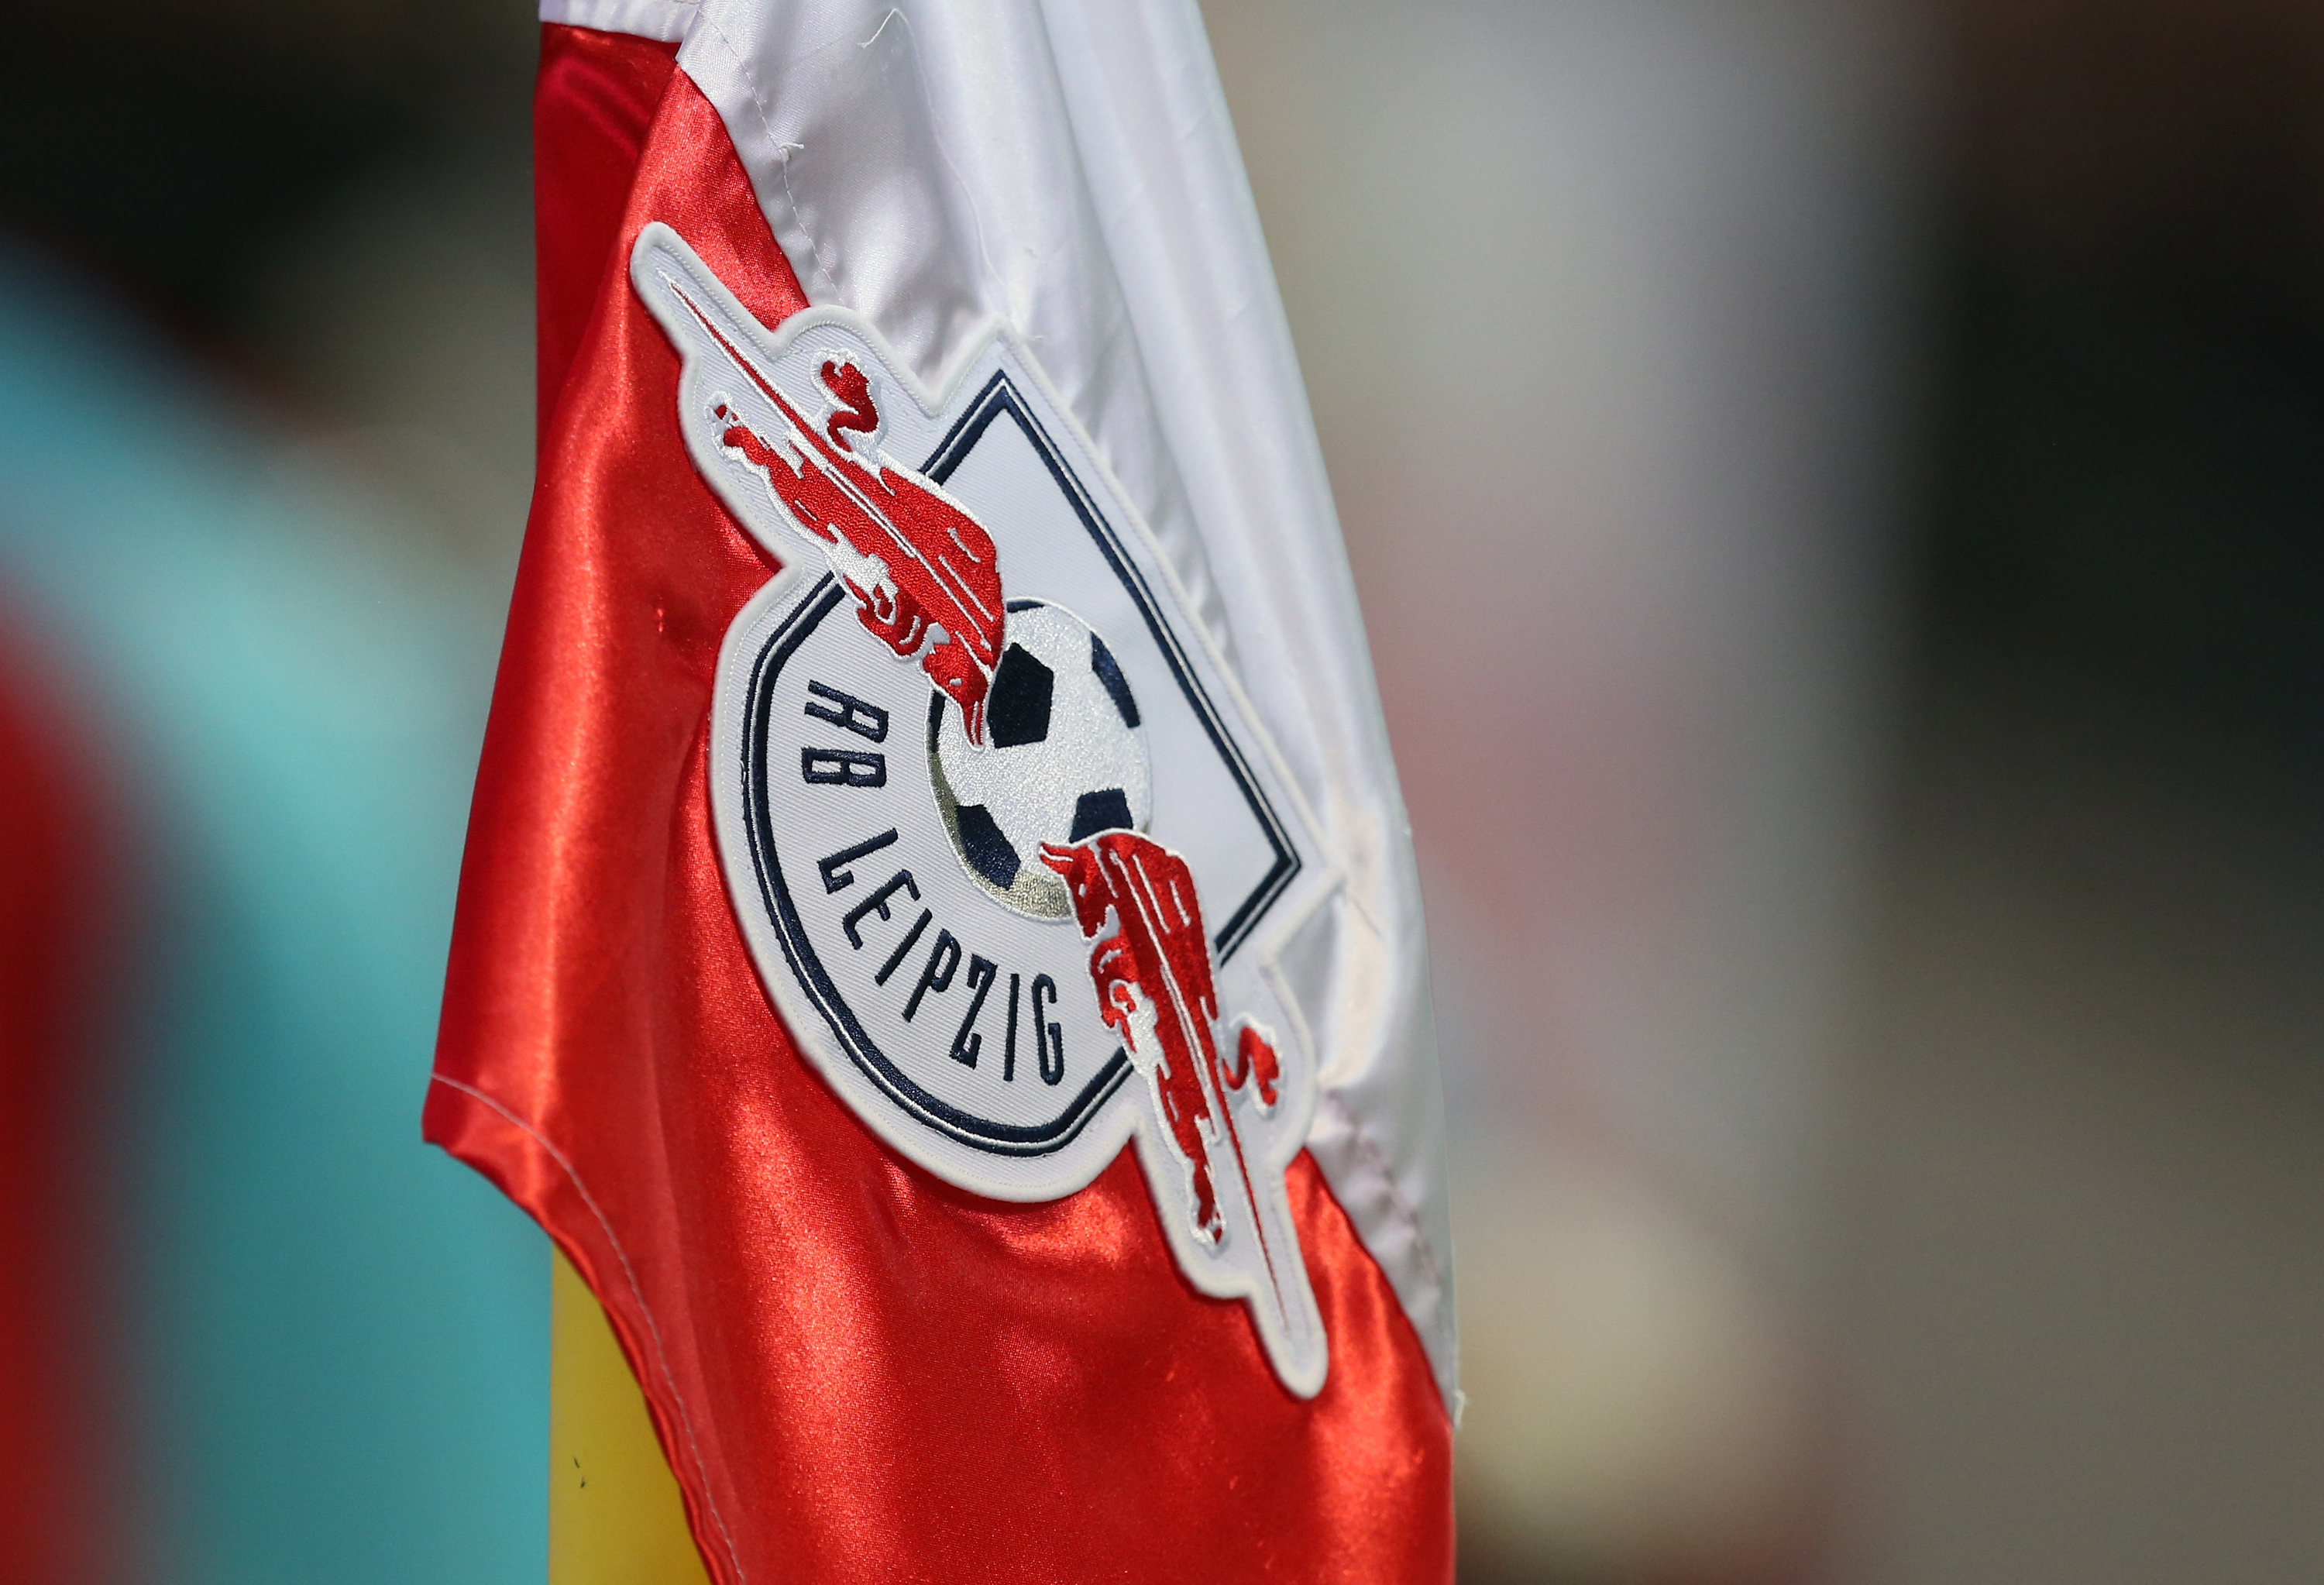 RB Leipzig will celebrate their 11th anniversary in a week (Photo by Matthias Kern/Bongarts/Getty Images)